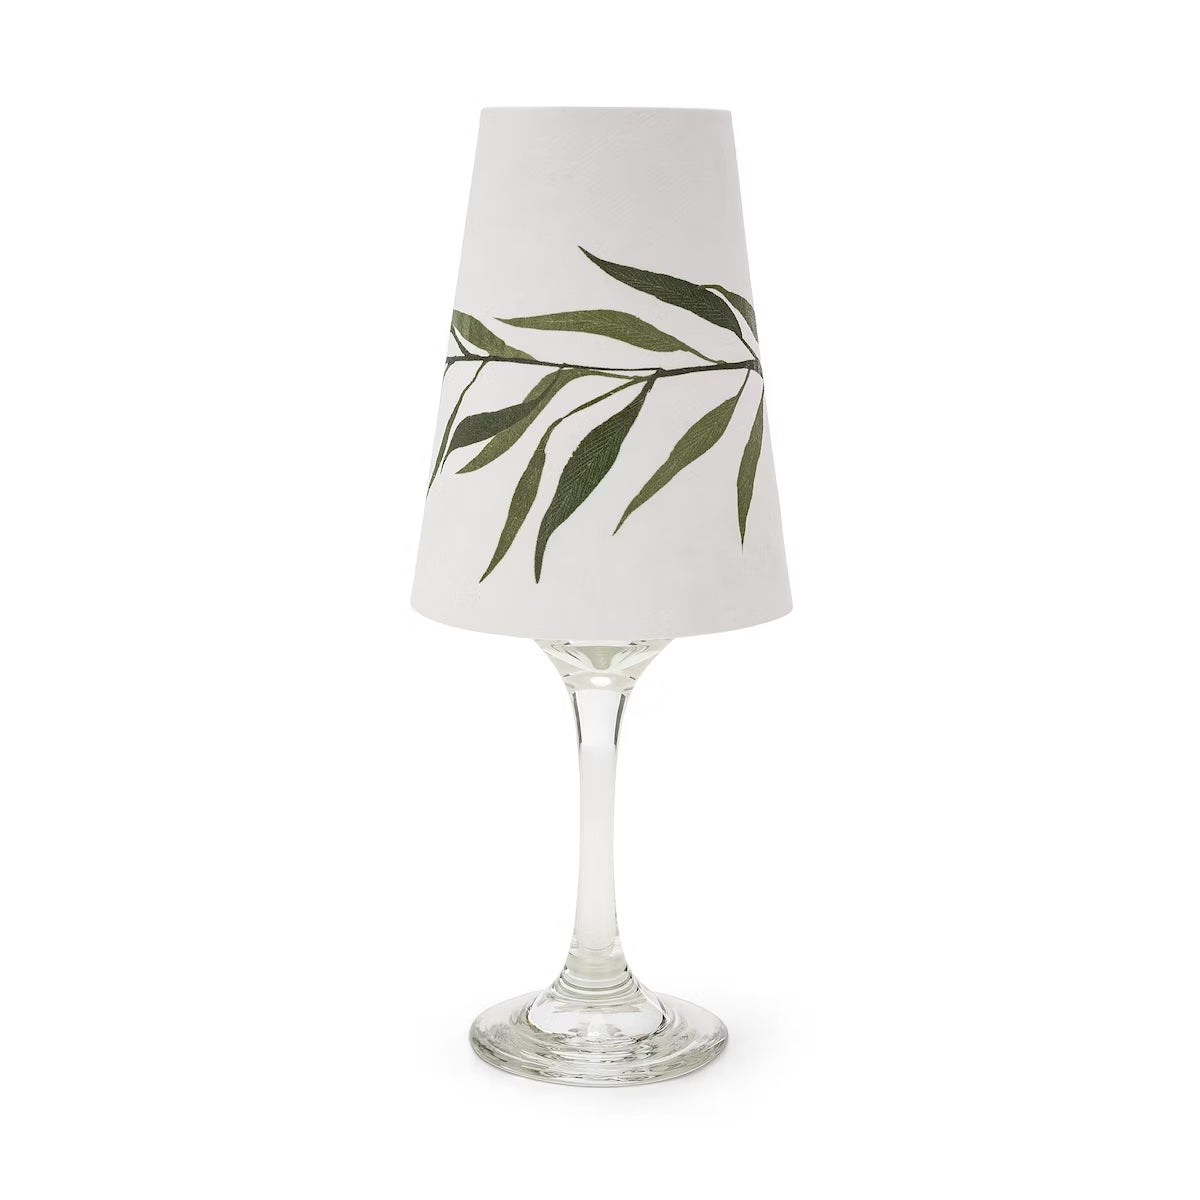 LAMPSHADE OLIVES